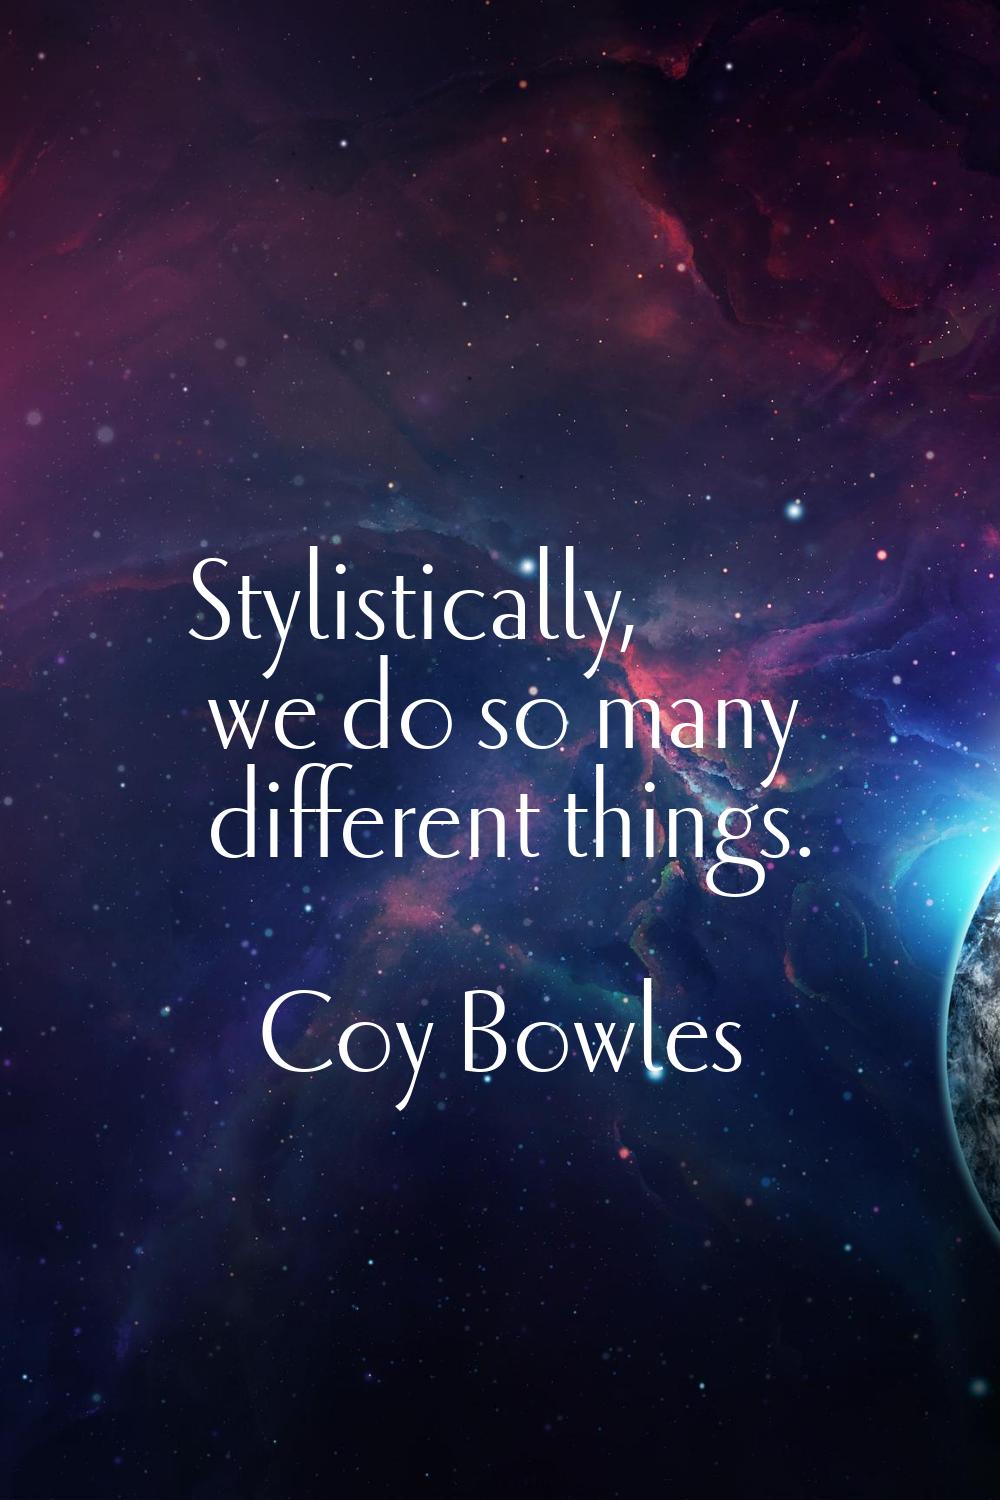 Stylistically, we do so many different things.